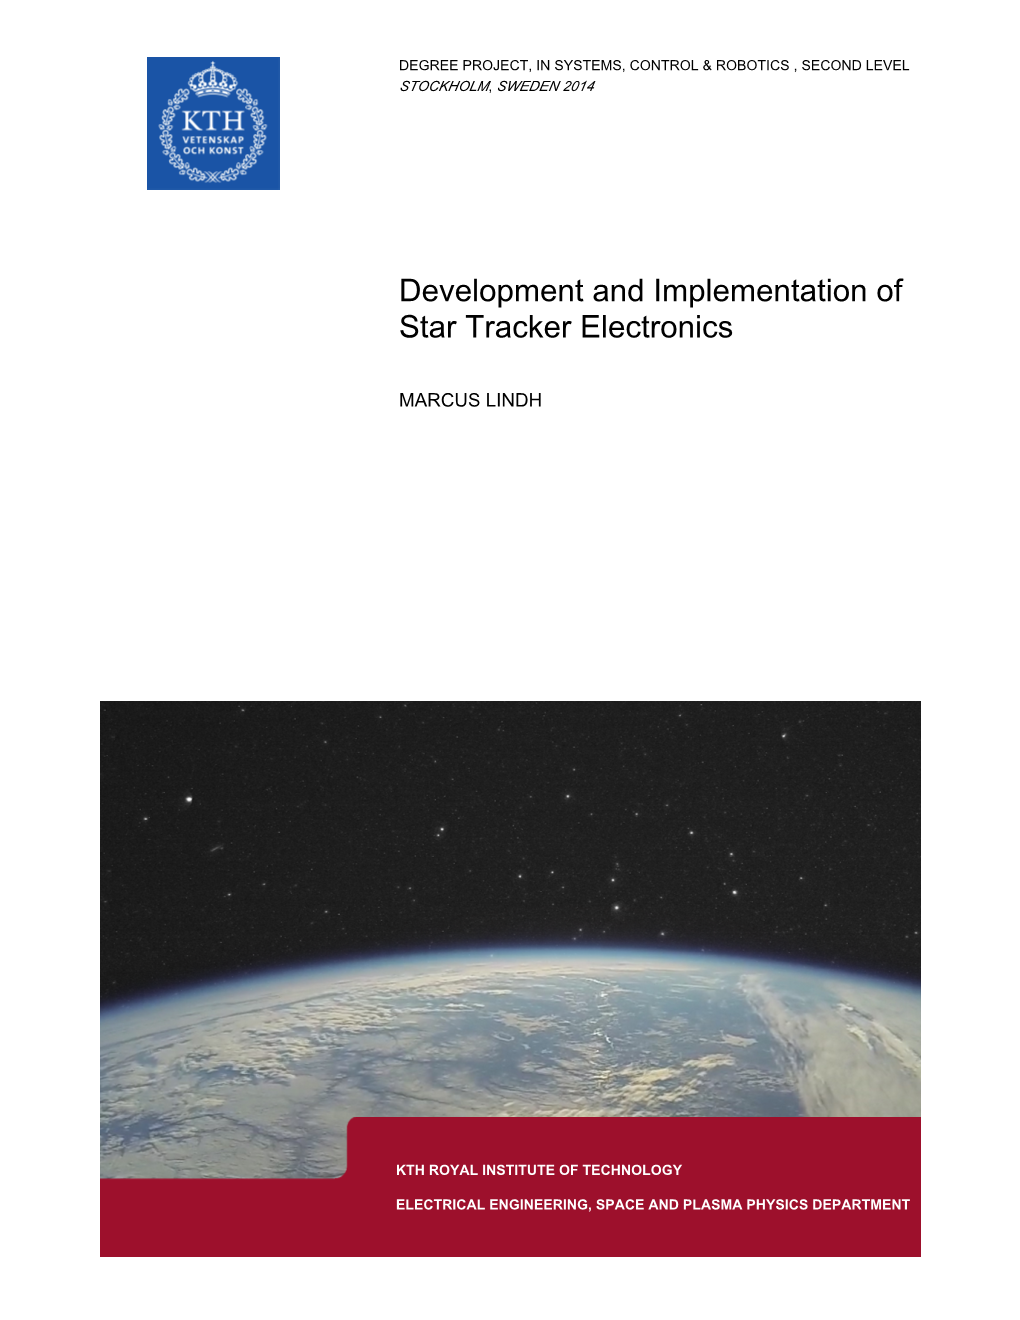 Development and Implementation of Star Tracker Electronics